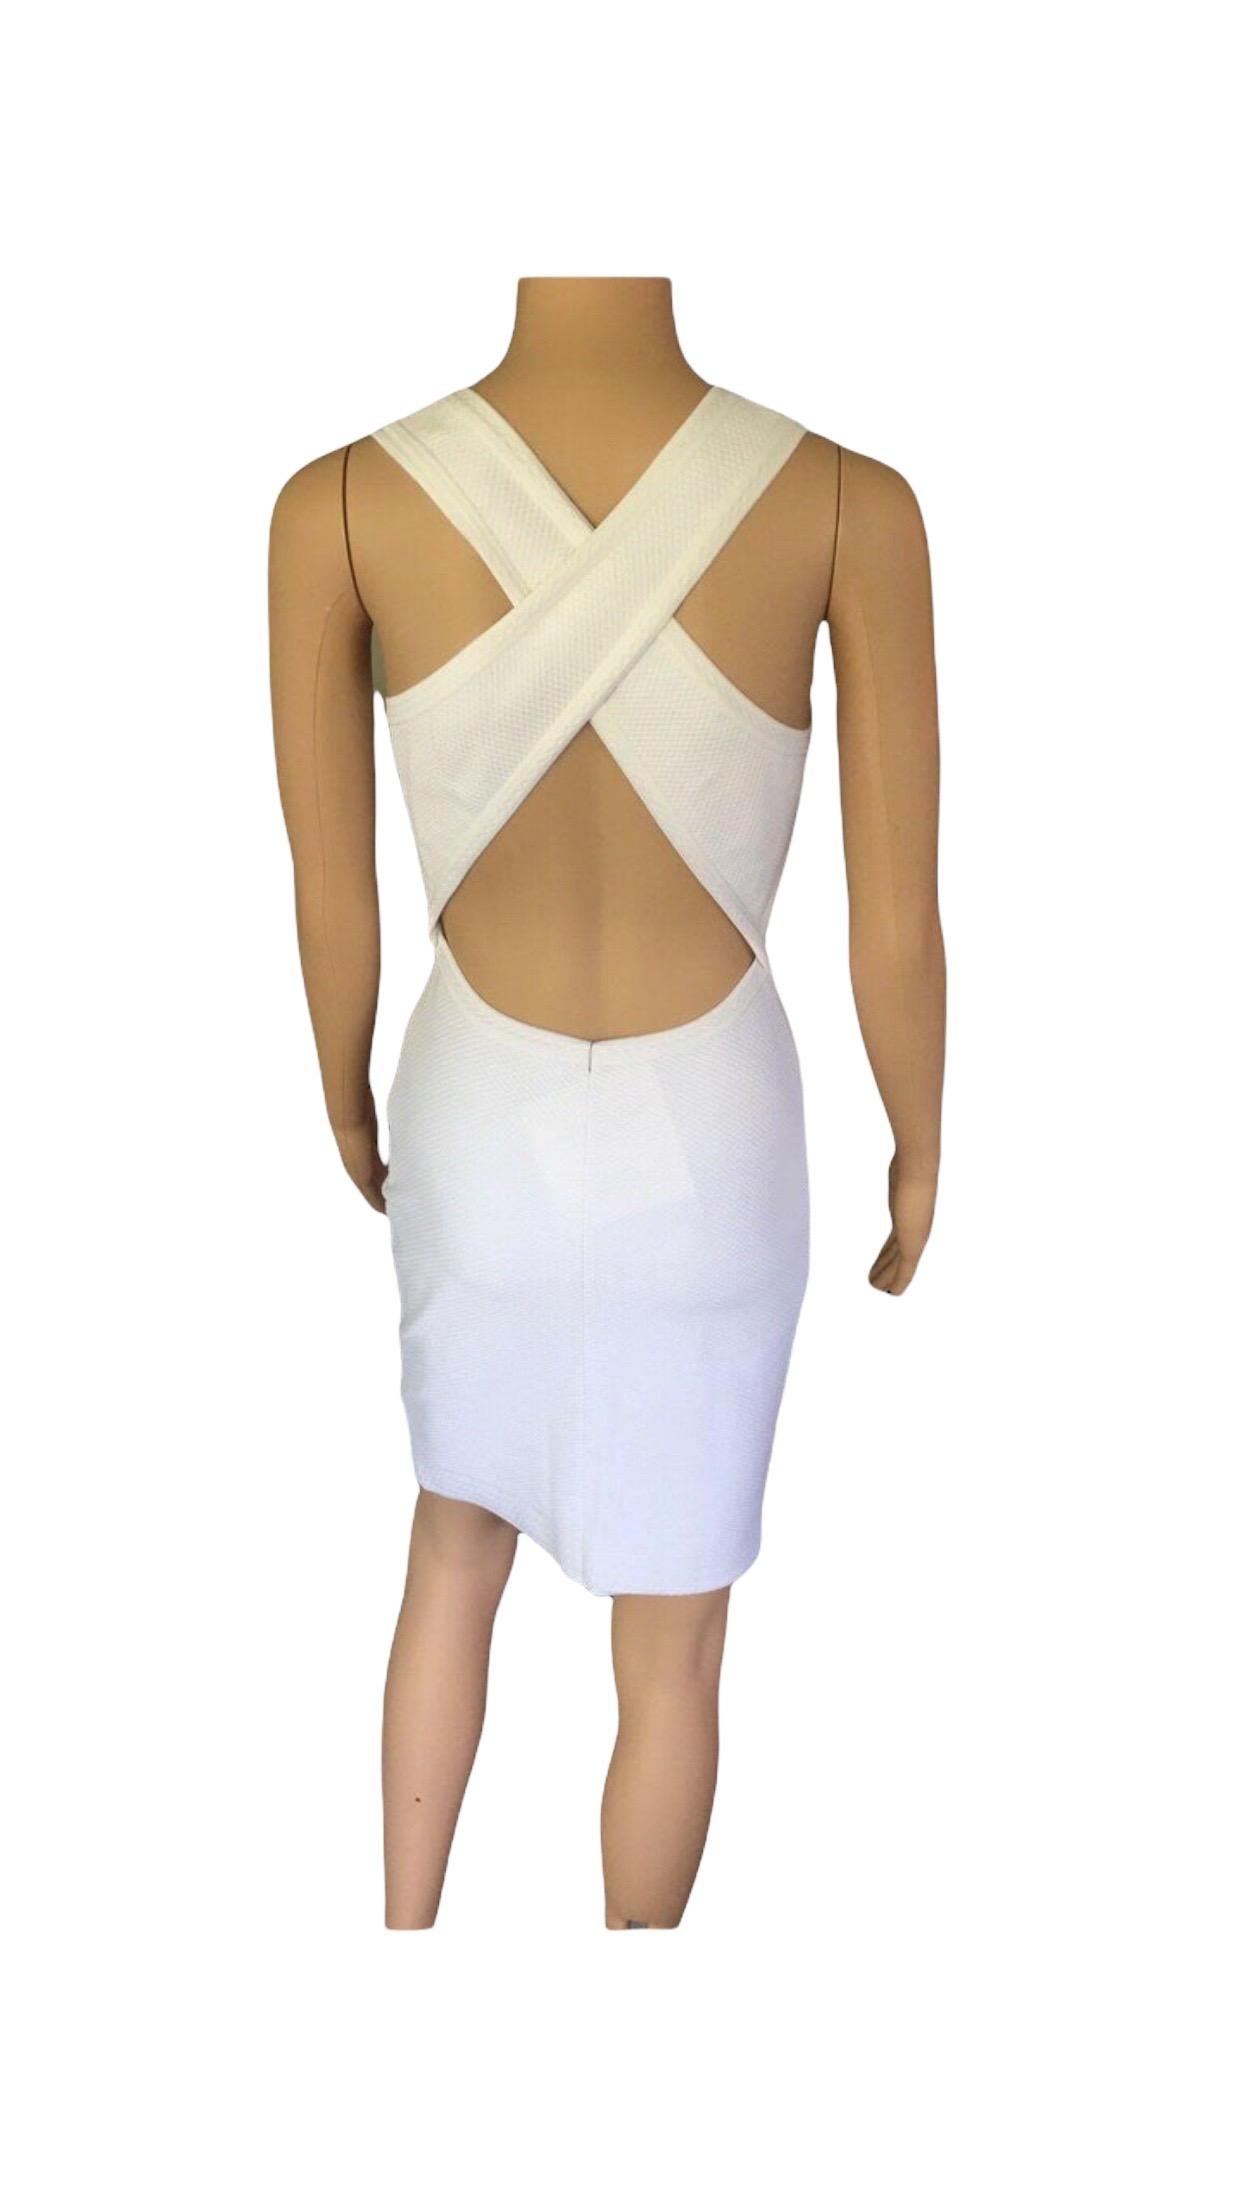 Azzedine Alaia Fitted Open Back Dress

White Alaïa sleeveless textured bodycon dress featuring scoop neckline, crossover straps at open back and concealed zip closure at side seam.

All Eyes on Alaïa

For the last half-century, the world’s most